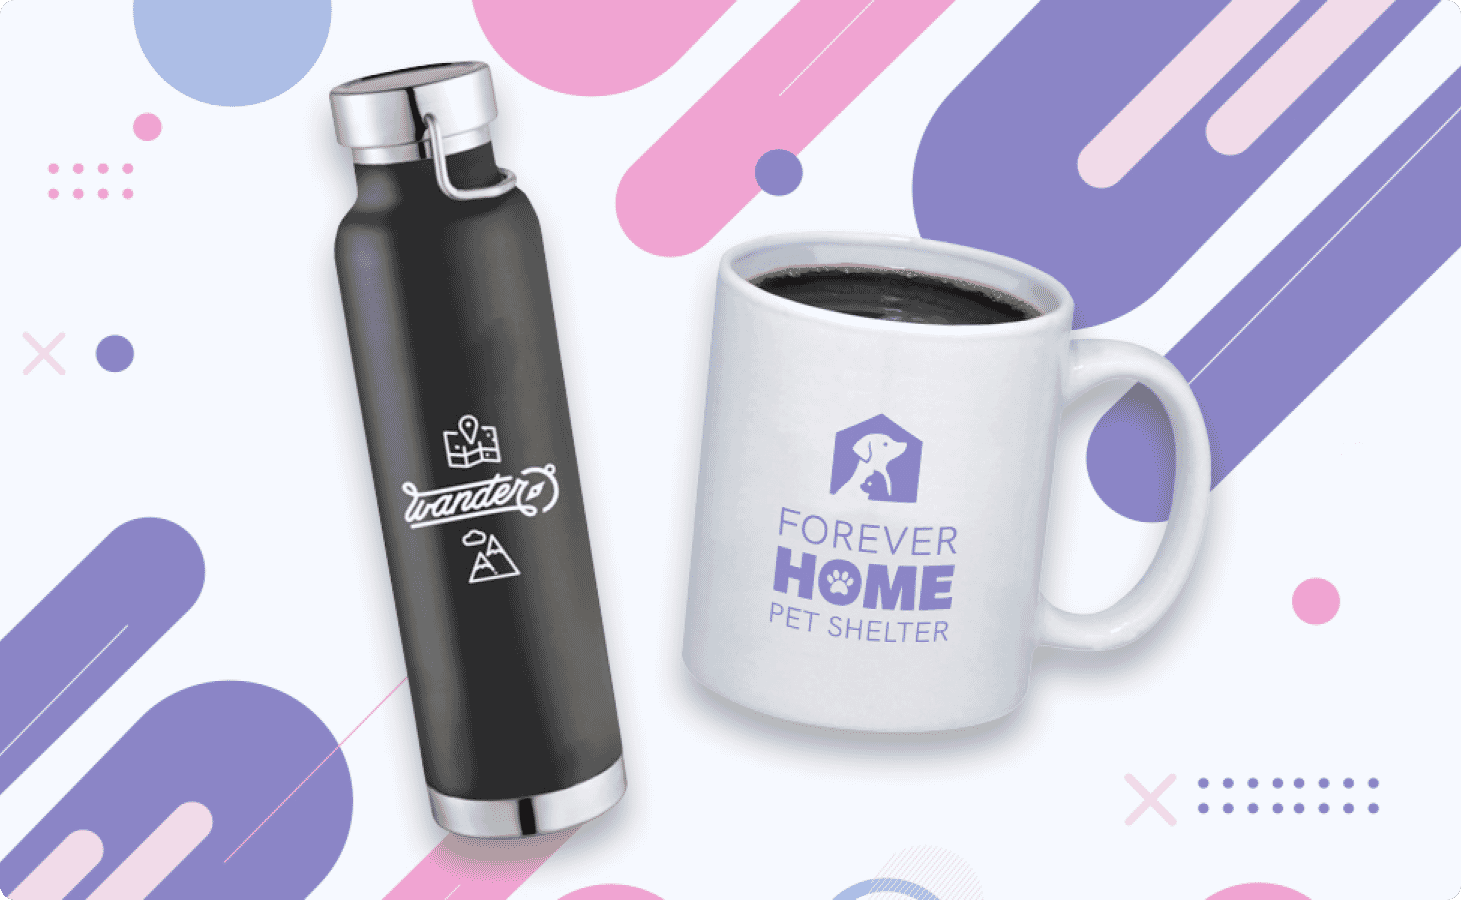 5. Brew up Some Support for your Cause with Branded Drinkware